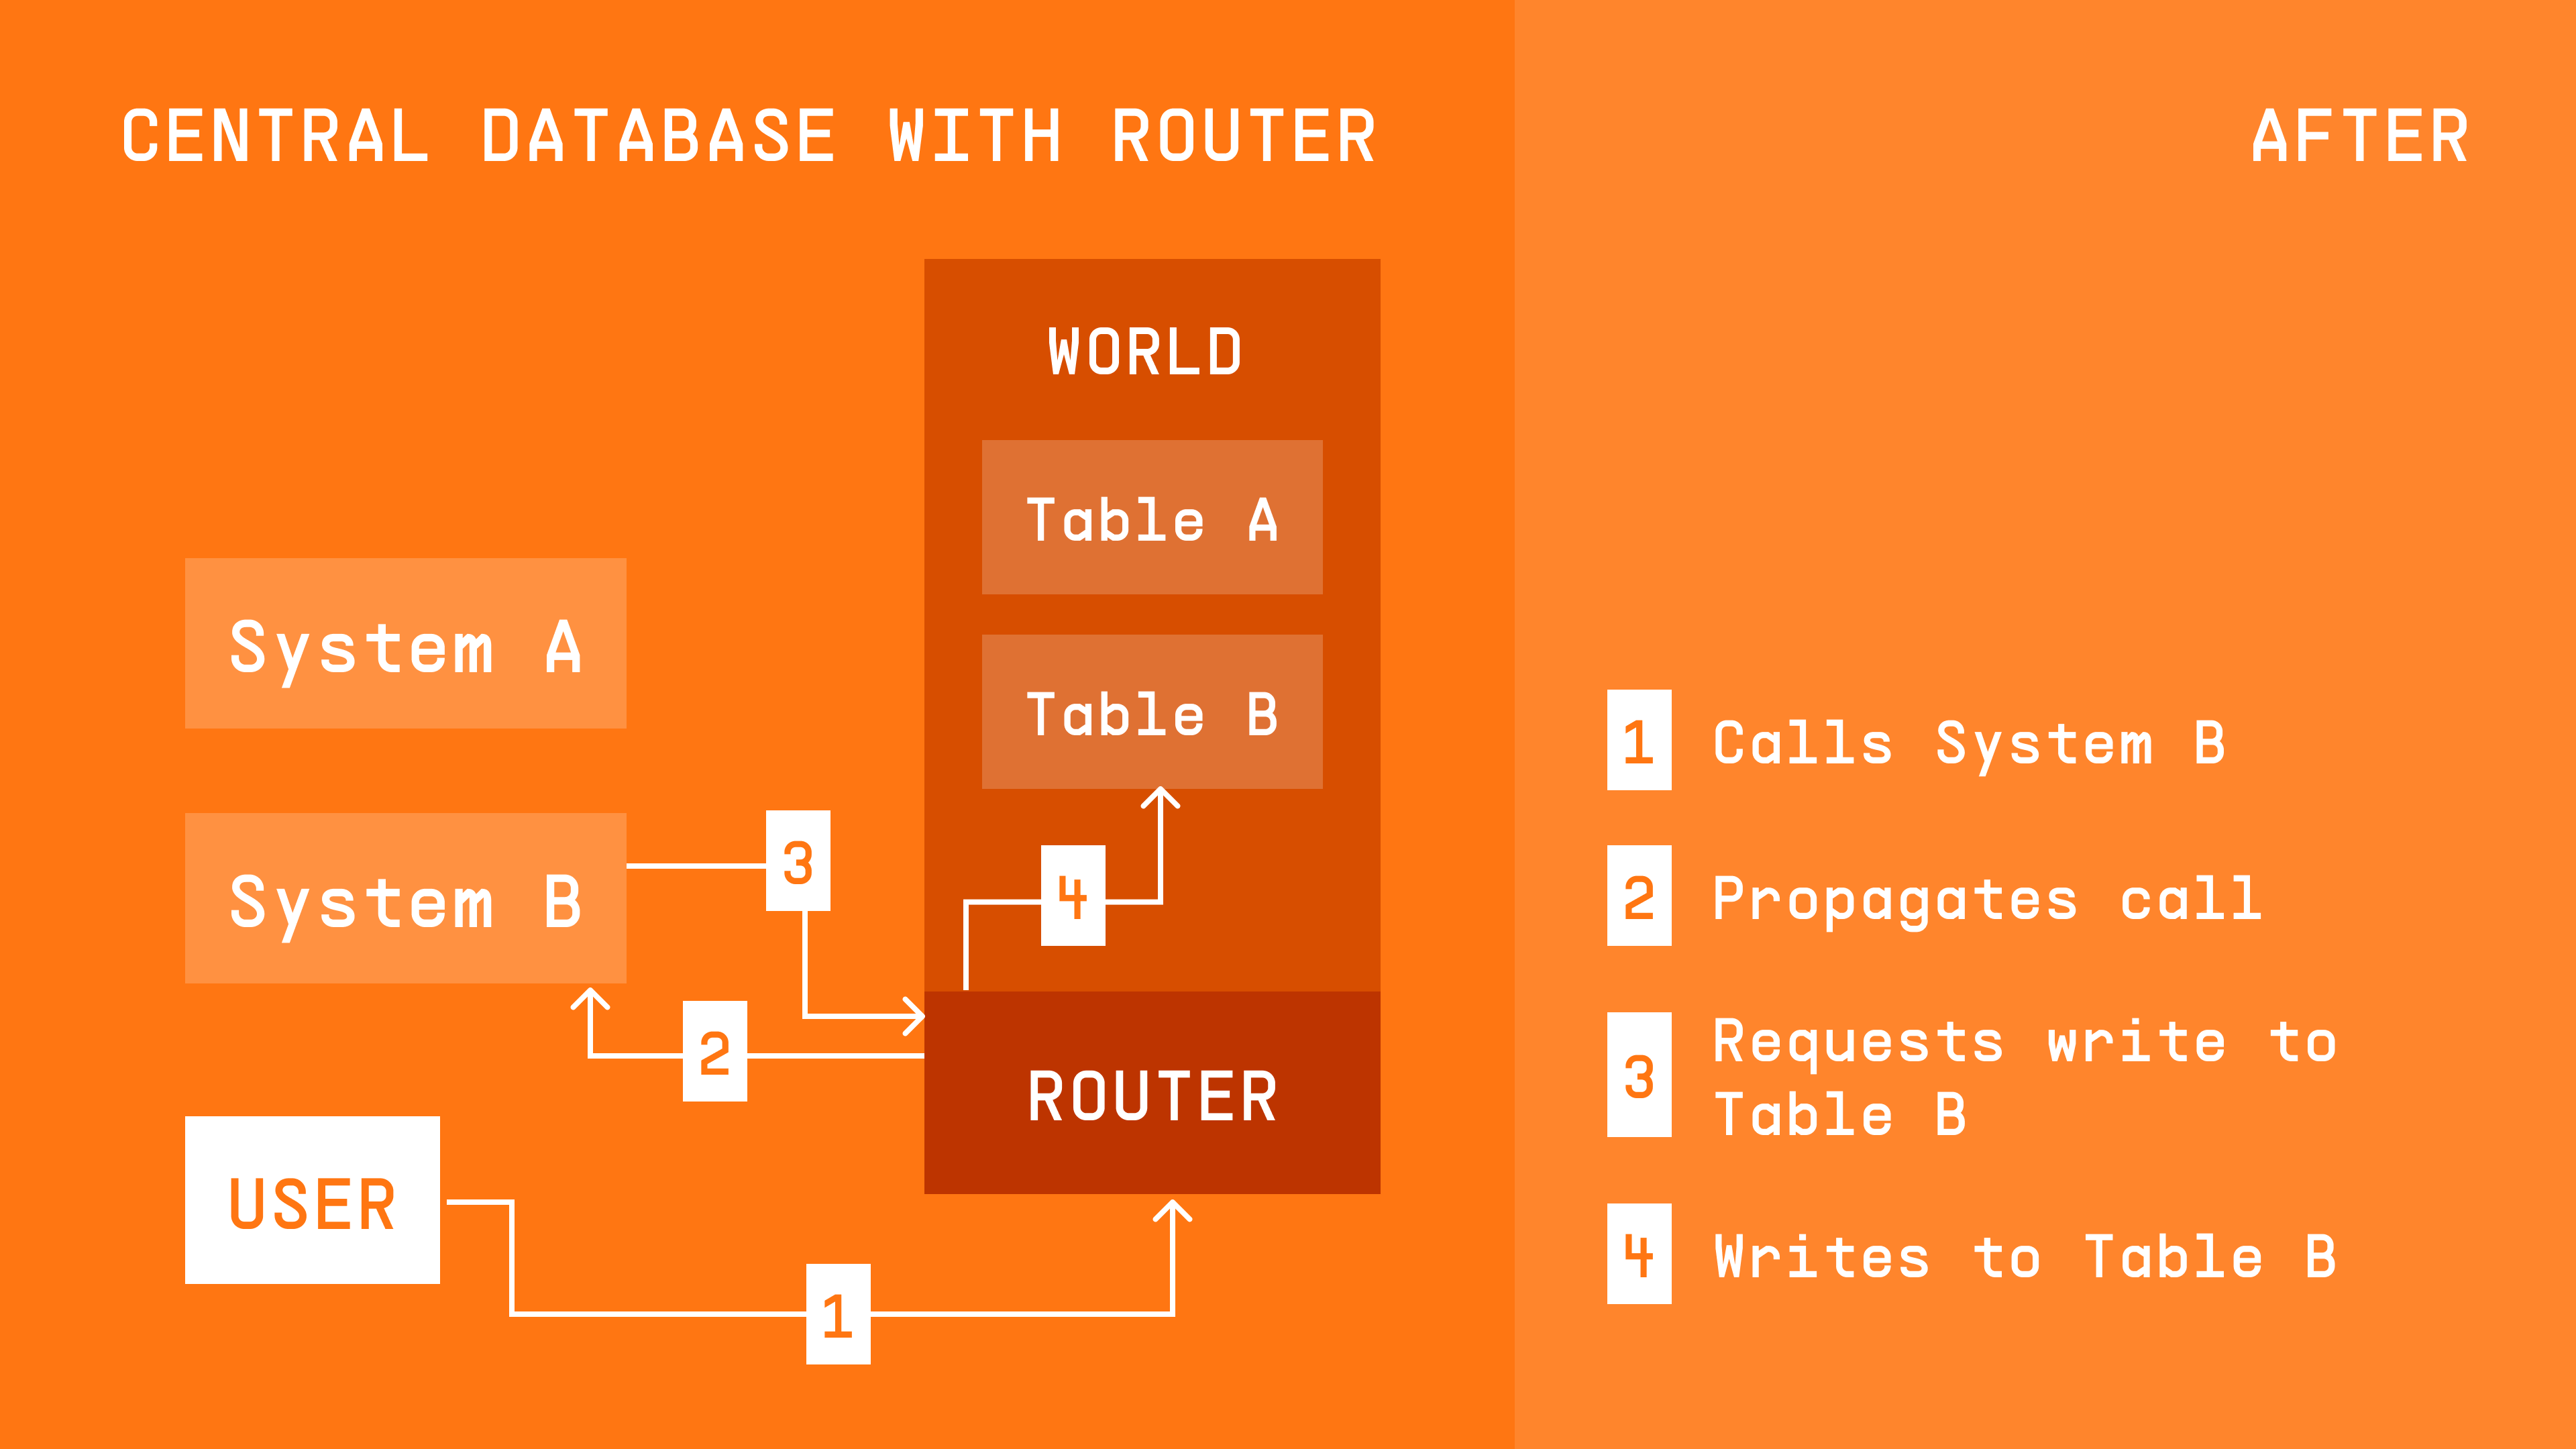 Central database with router